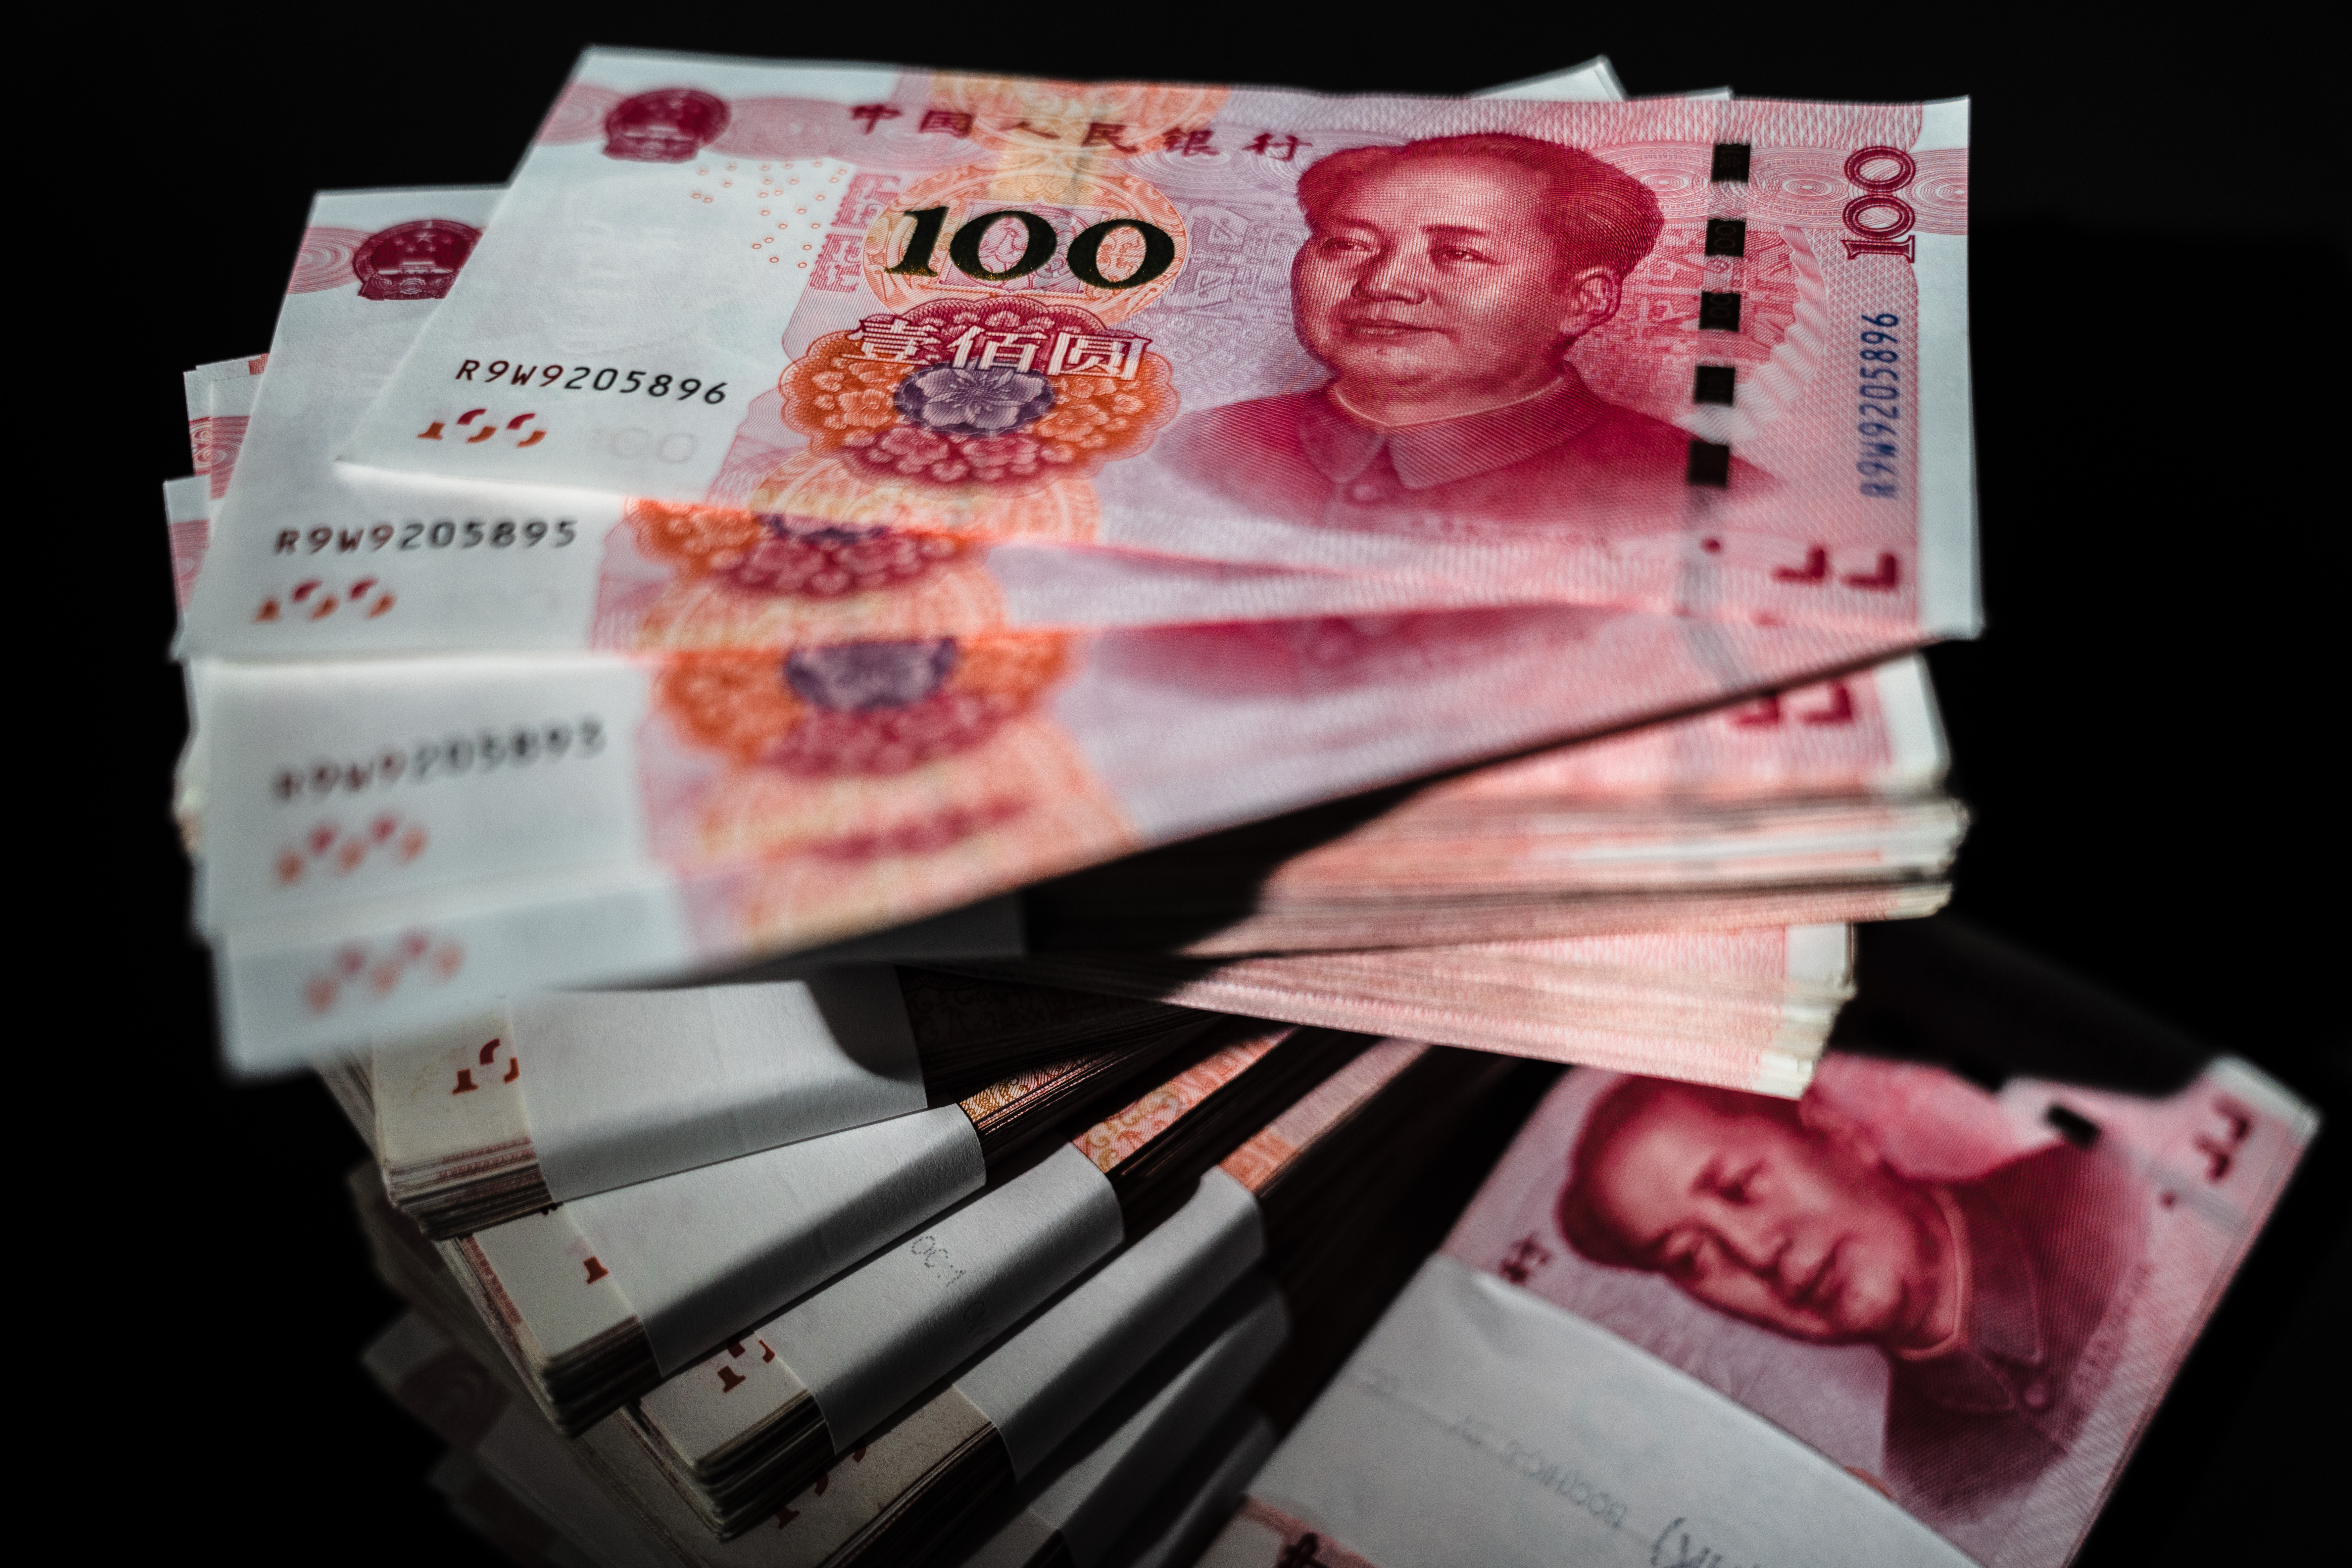 On Monday, the onshore yuan hit a five-month low, after a fresh round of hot U.S. inflation data bolstered the greenback and Treasury yields. Photo: Bloomberg